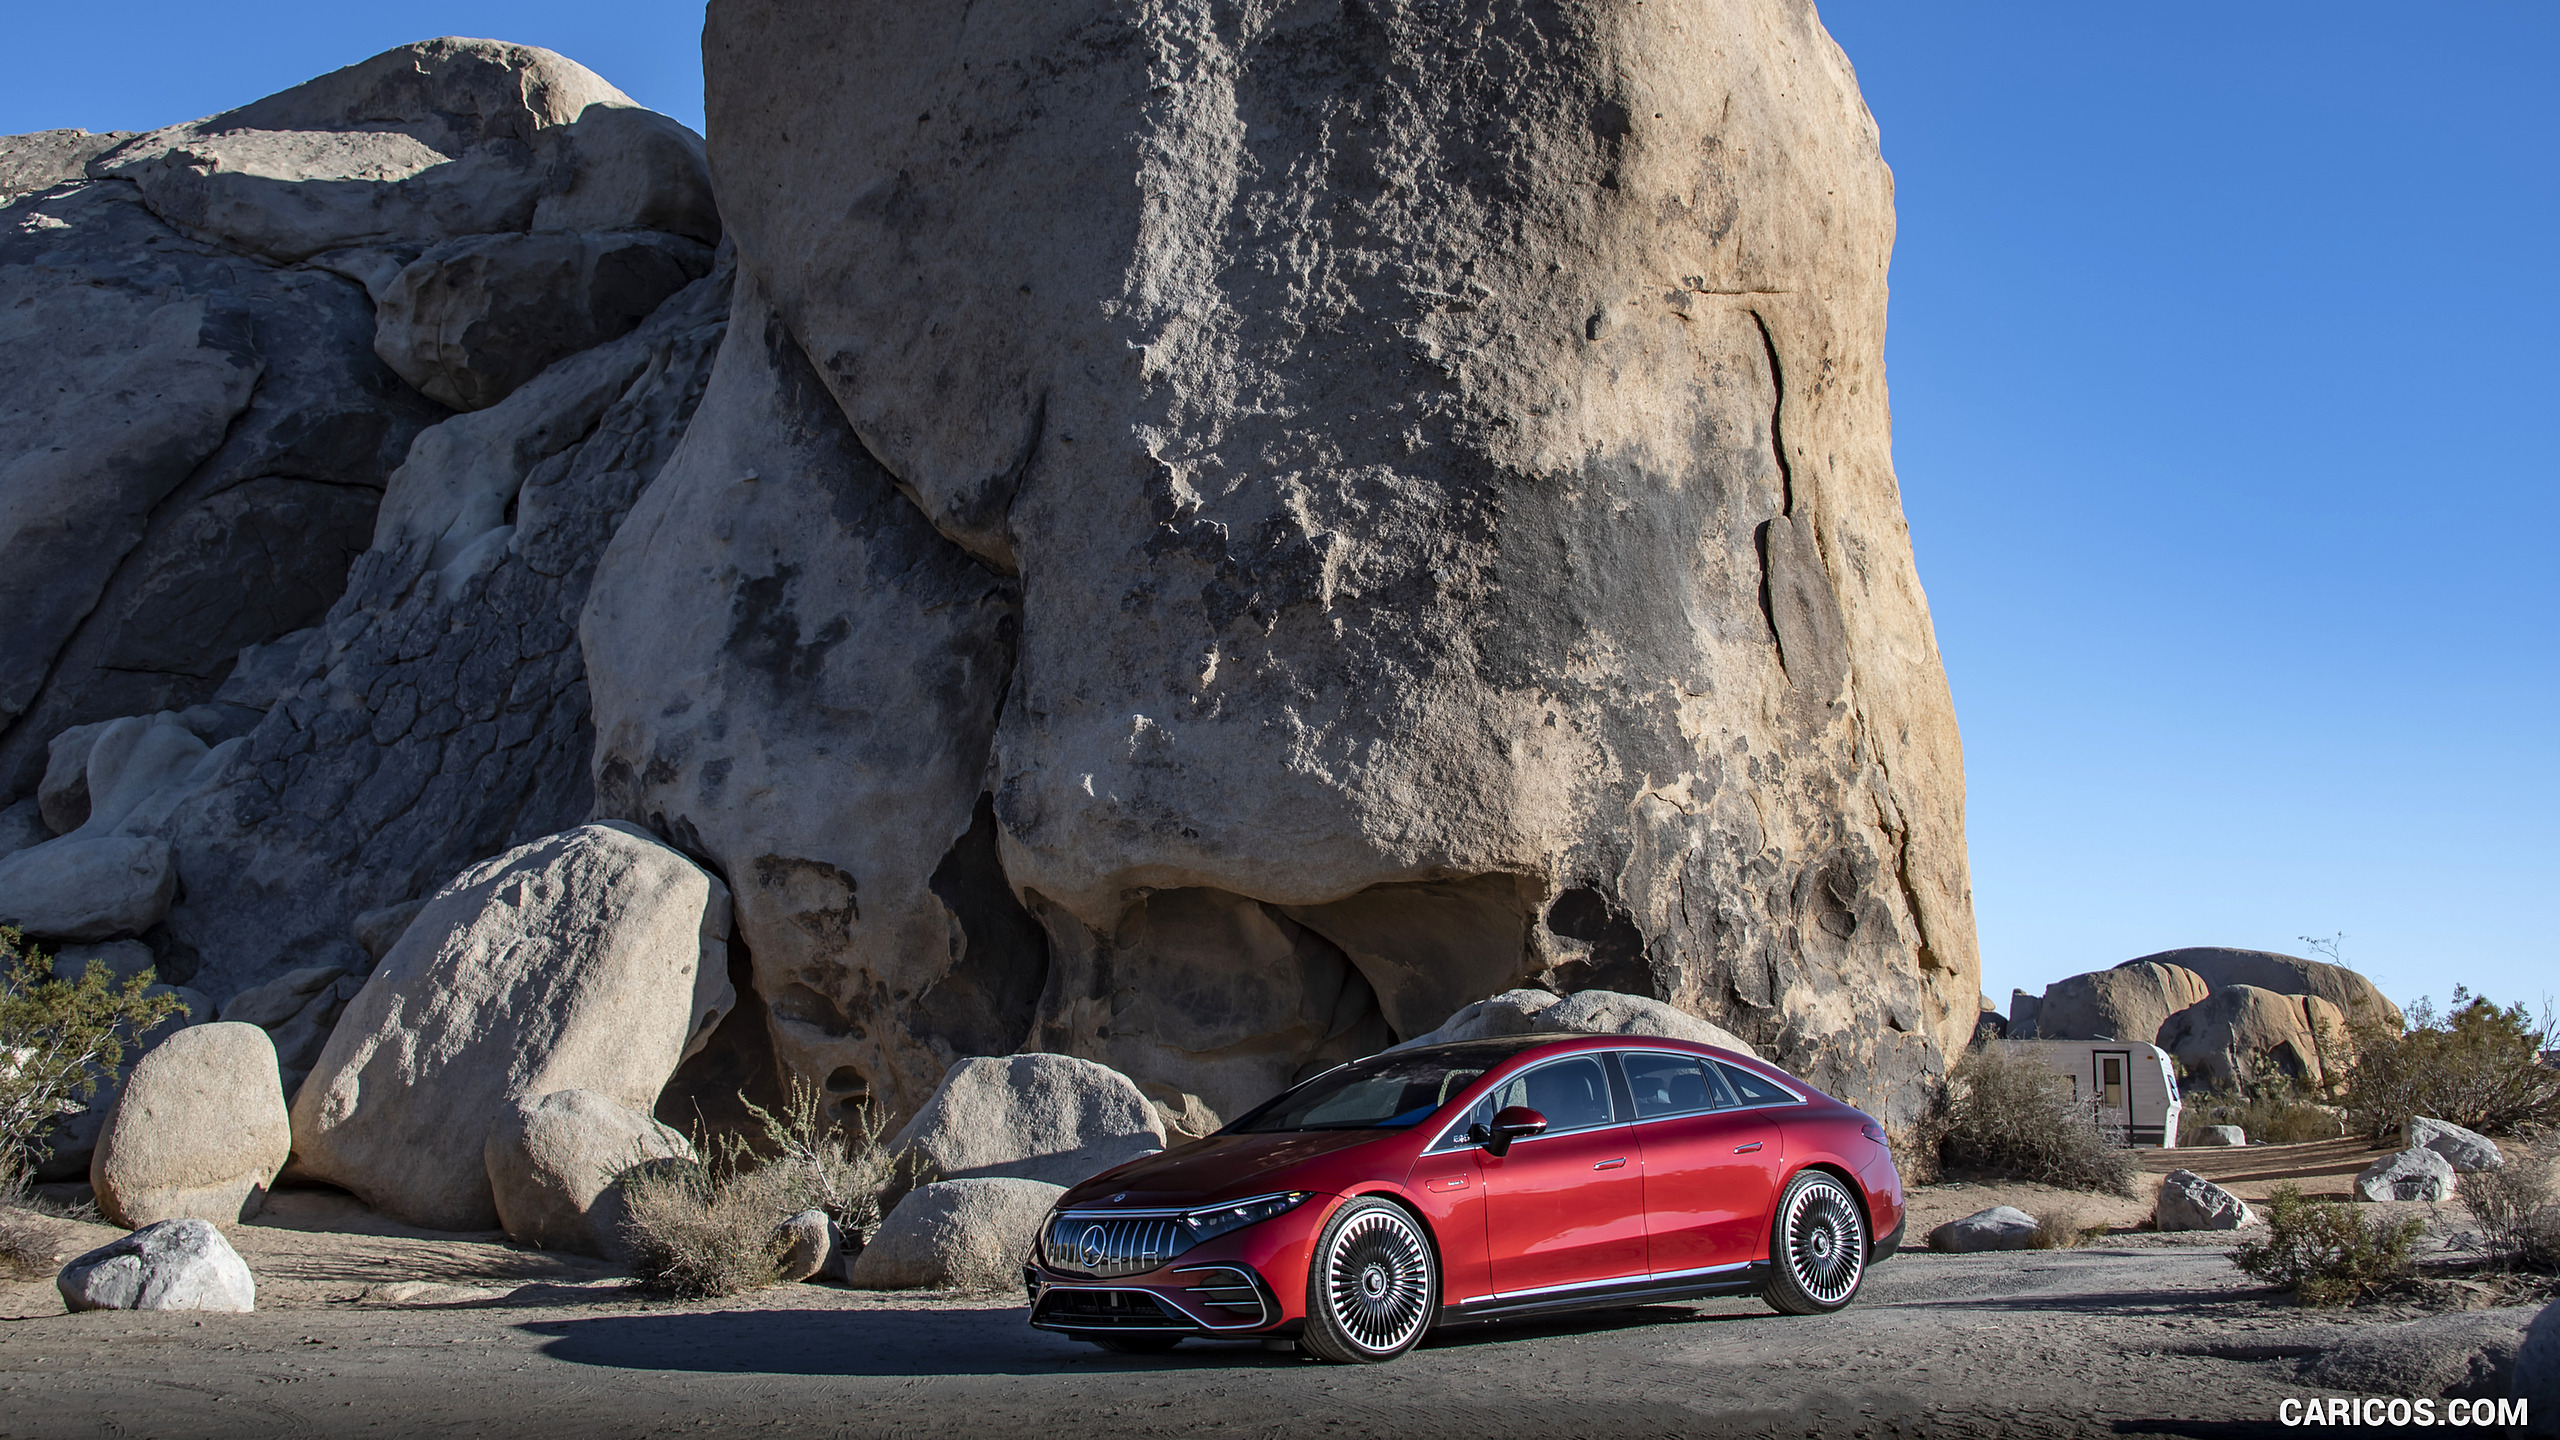 2022 Mercedes-AMG EQS 53 4MATIC+ (Color: Hyazinth Red Metallic) - Front Three-Quarter, #57 of 76